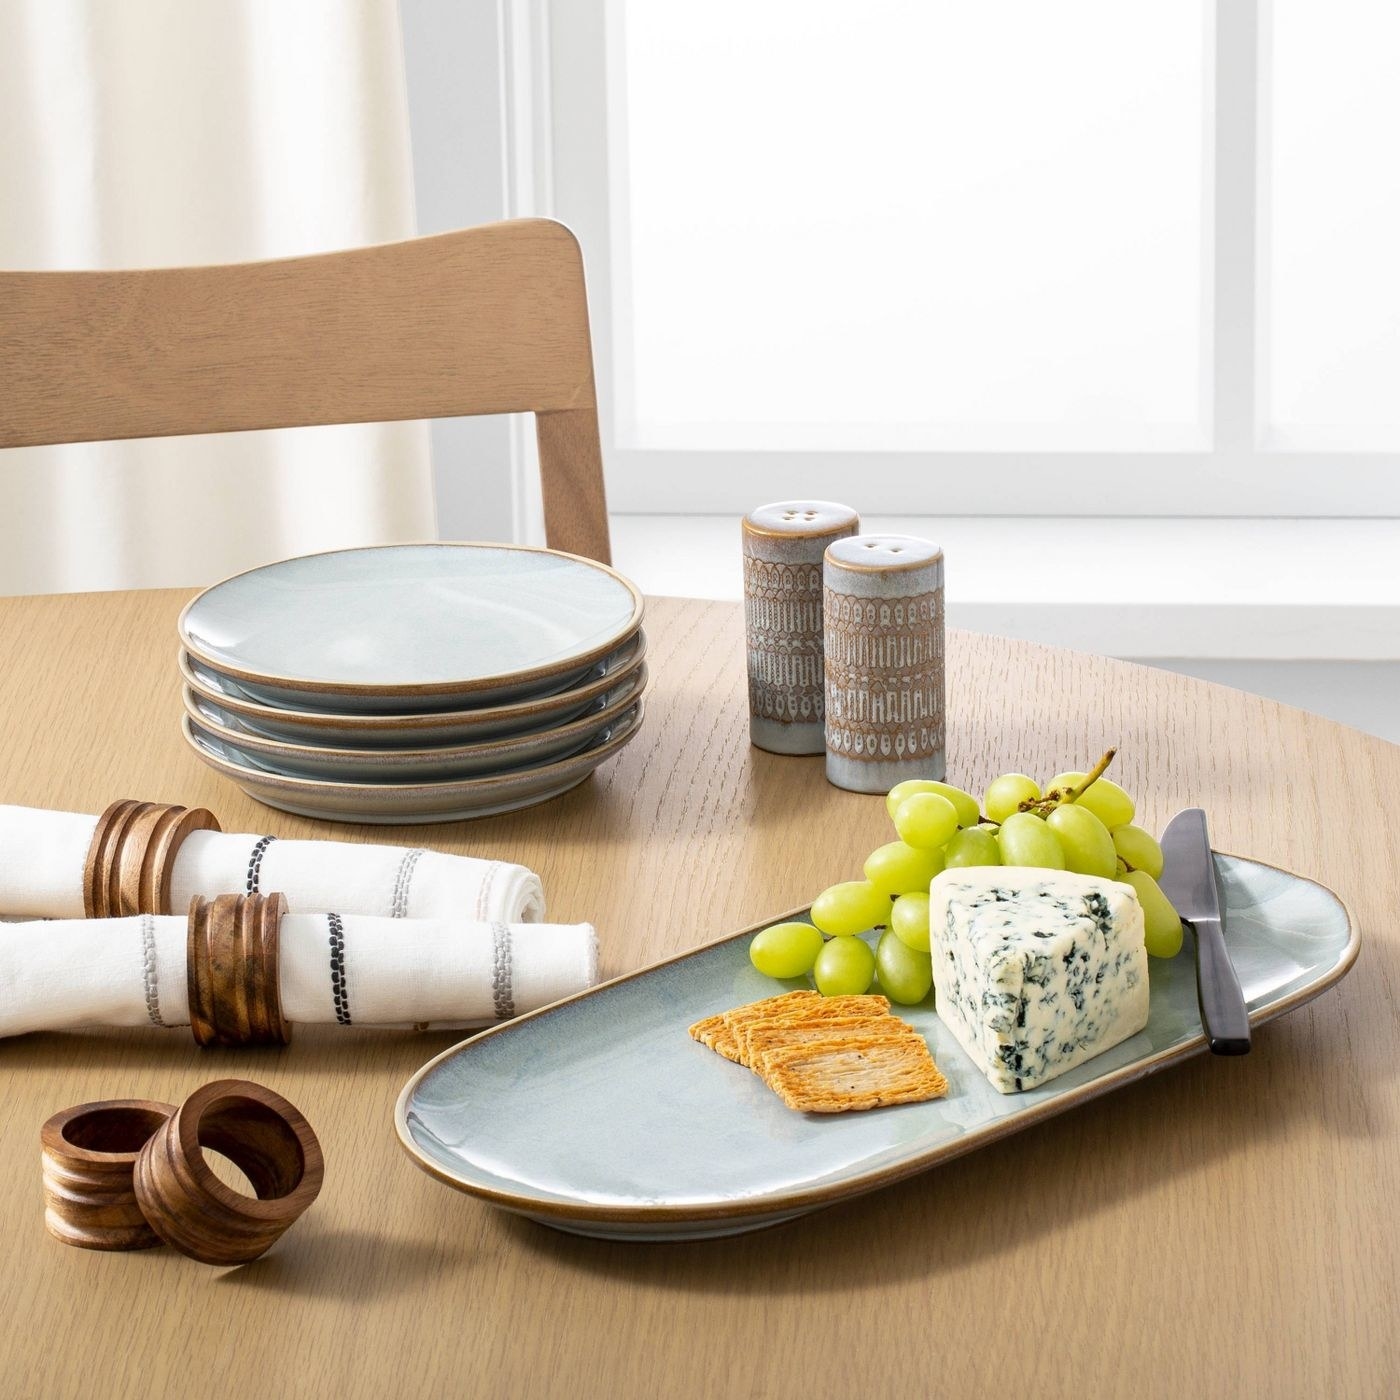 Wood napkin rings on napkin with a cheese plate, plates and salt and pepper shaker